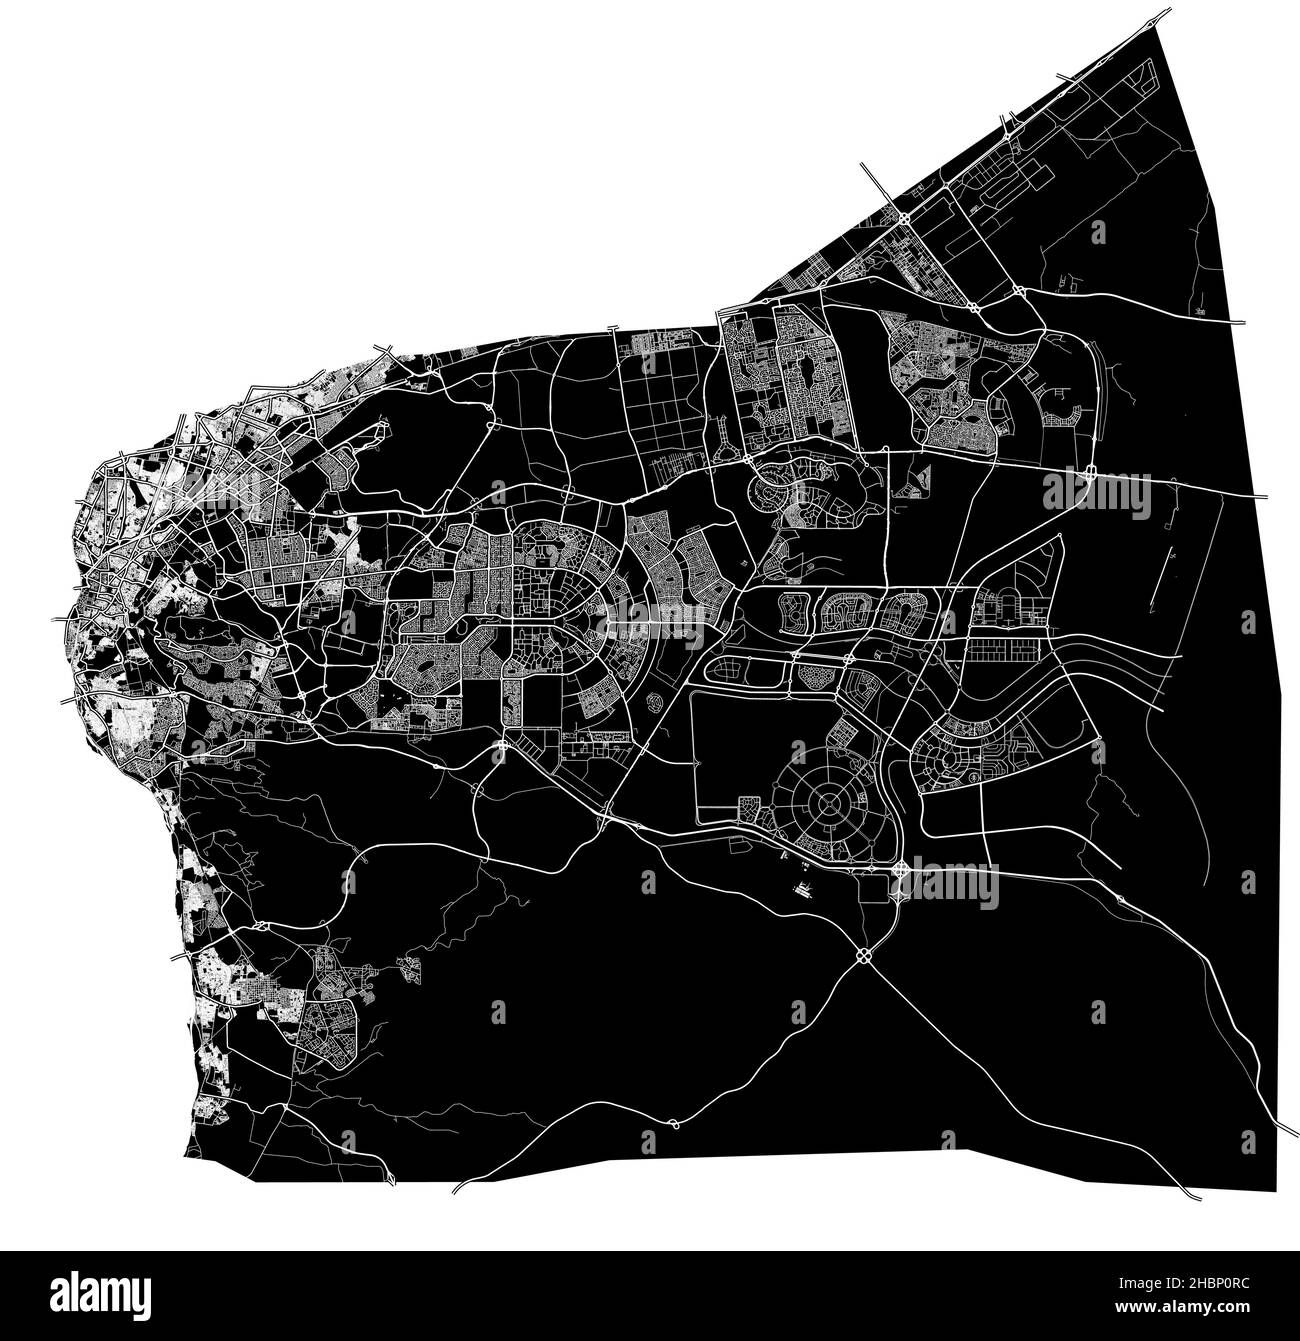 Cairo, Egypt, high resolution vector map with city boundaries, and editable paths. The city map was drawn with white areas and lines for main roads, s Stock Vector